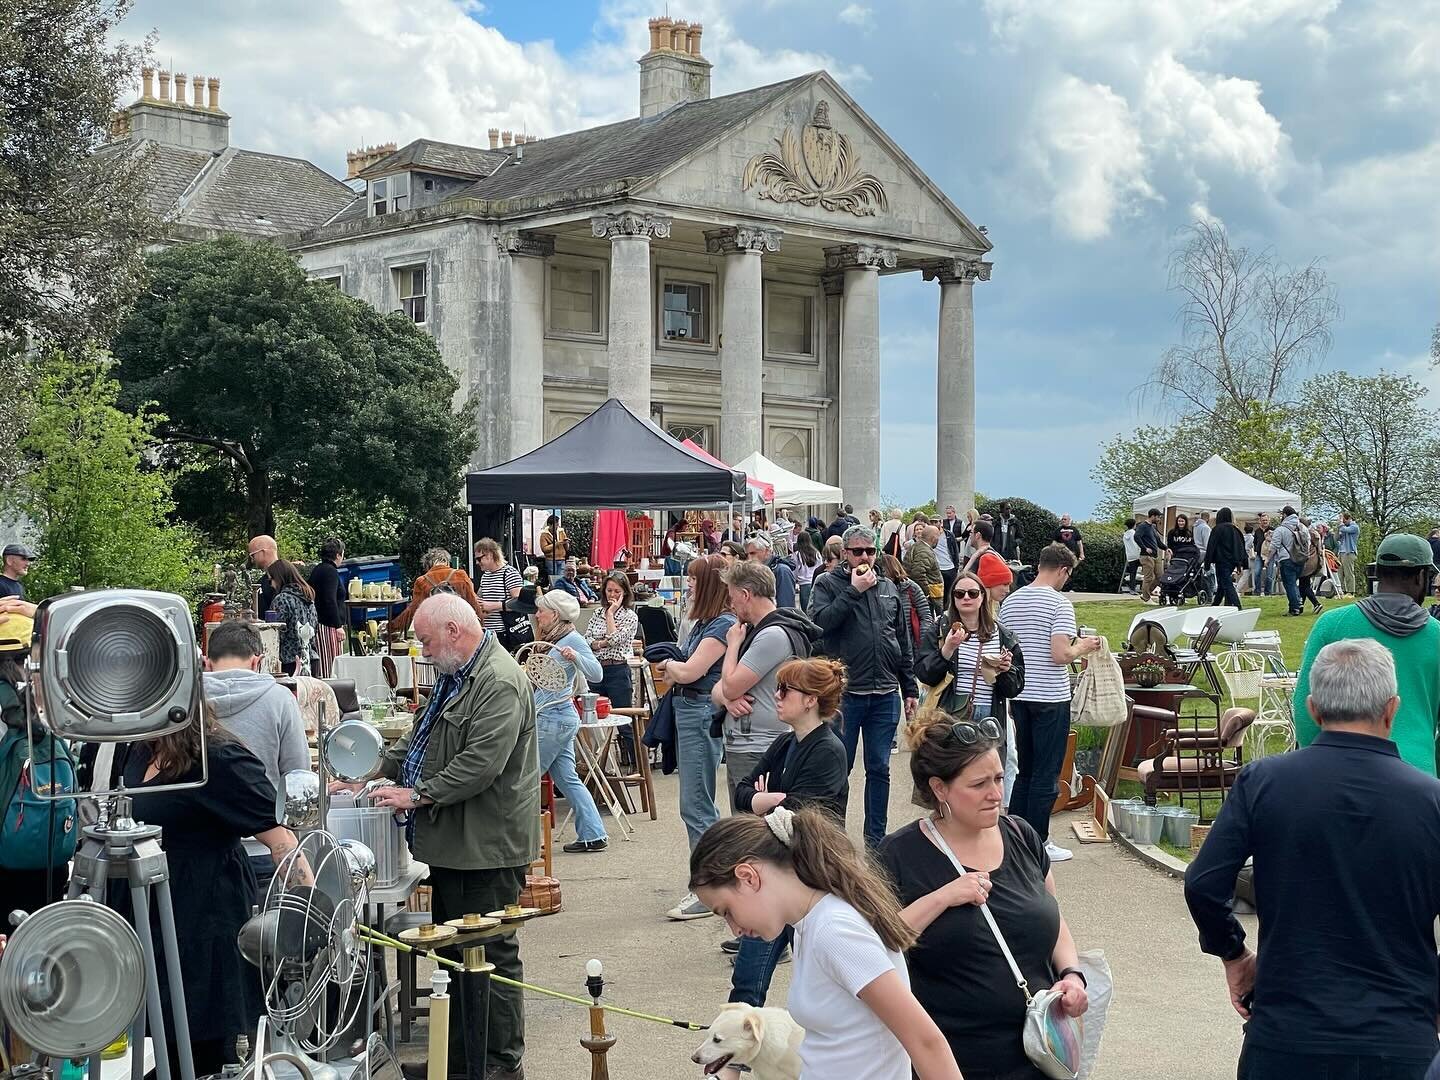 Today! - Vintage Market at the Mansion, at Beckenham Place Park 🌱🏛🐣
@beckenhamplace

50 great vintage dealers outdoors and inside the Mansion:

Mid 20th-century furniture, lighting, ceramics and homeware, original travel posters, prints, books, re